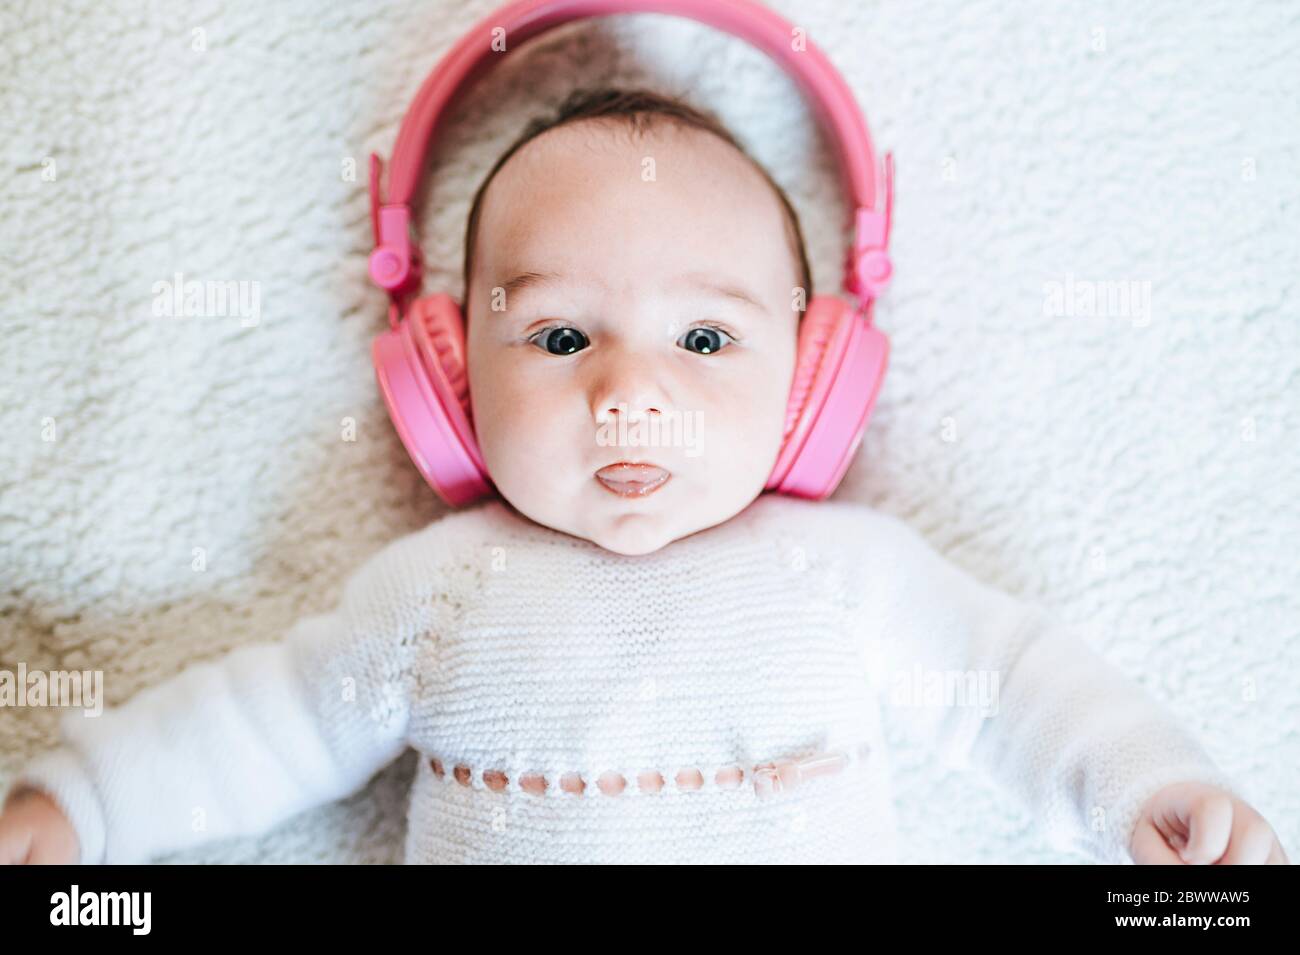 Portrait of baby girl with oversized pink headphones lying on blanket sticking out tongue Stock Photo